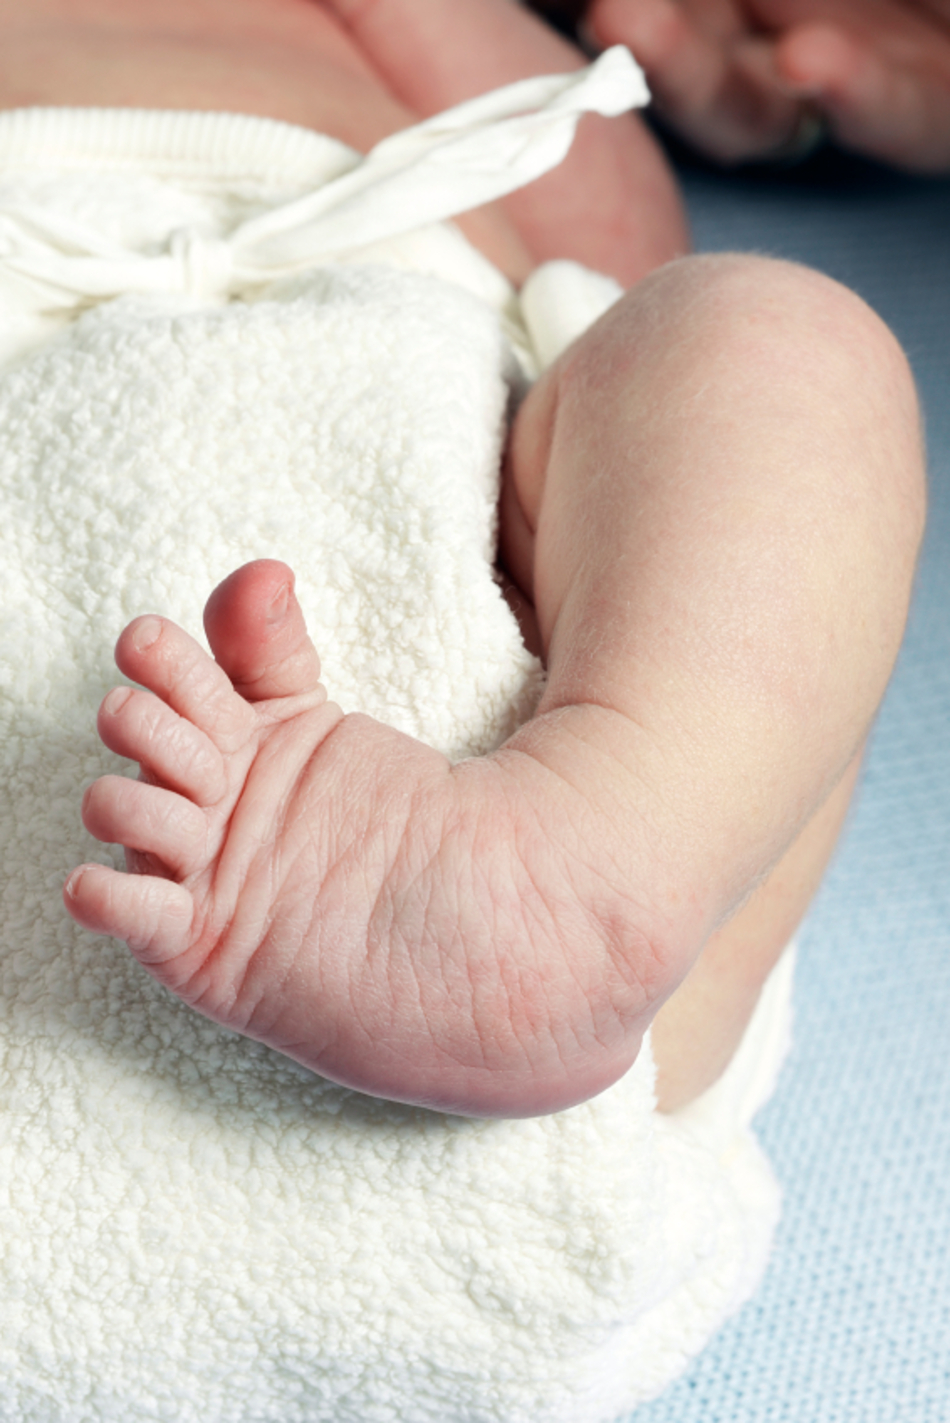 Birth Defects Aren’t as Rare as You Think: 1 in 33 Babies is Born with One